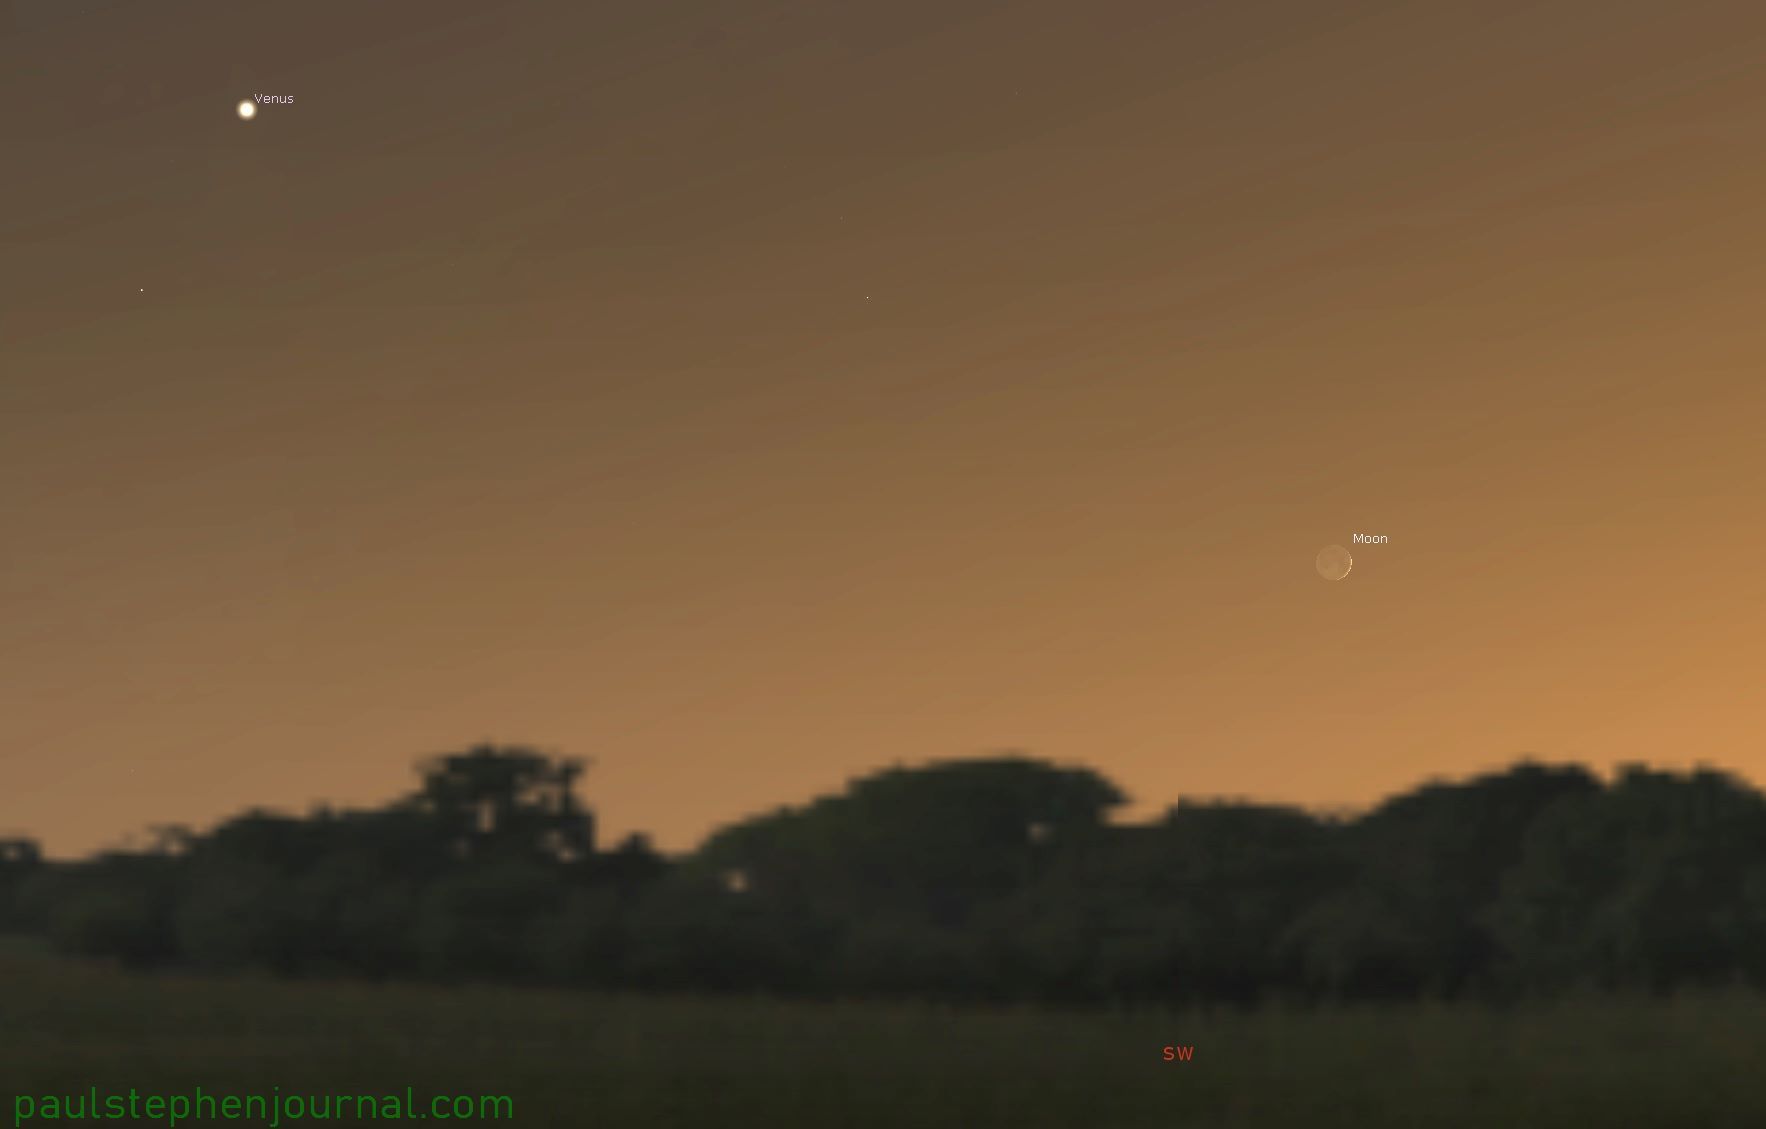 Young Crescent Moon with Venus